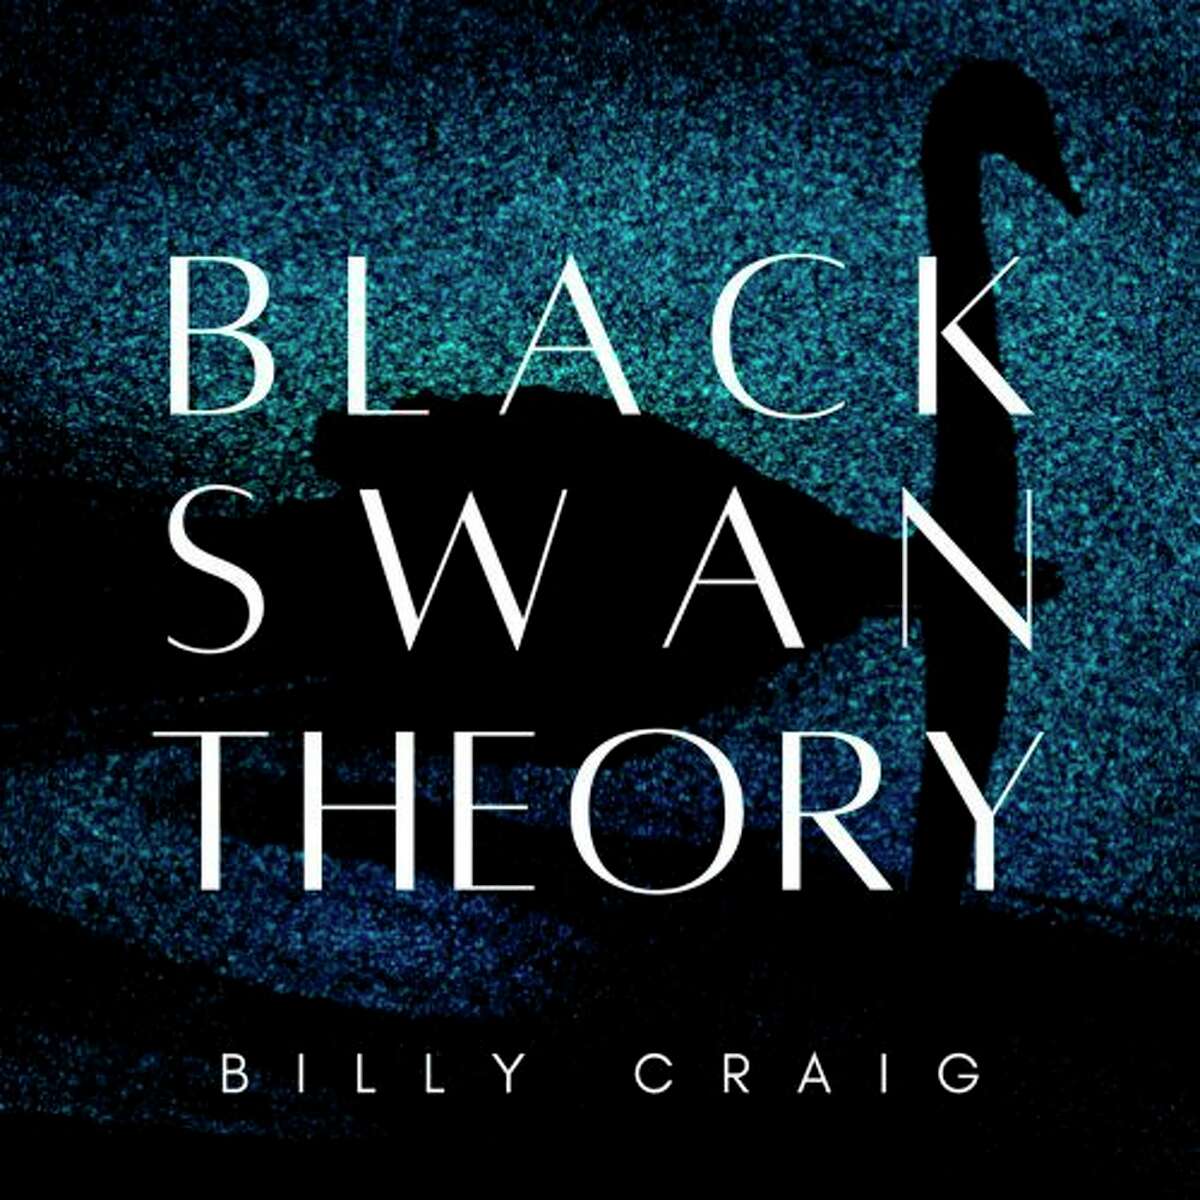 Big Rapids native and musician Billy Craig recently released his latest album Black Swan Theory with Rock Island Records. (Courtesy/Rock Island records)